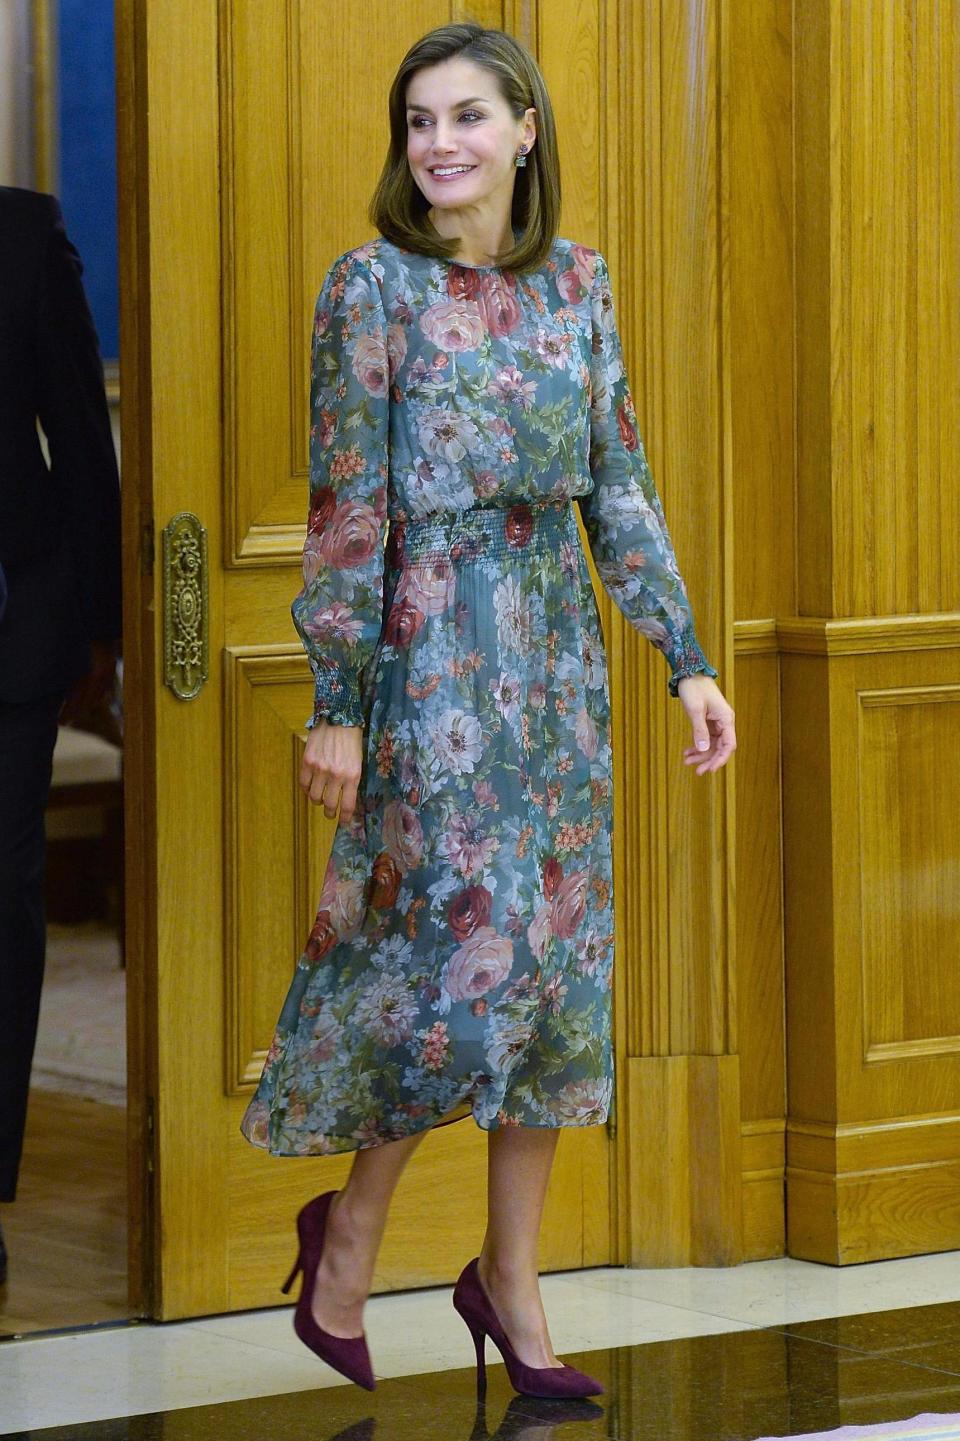 Spain's Queen Letizia certainly made a statement when she hosted an audience for medical professionals at Zarzuela Palace in Madrid this week.